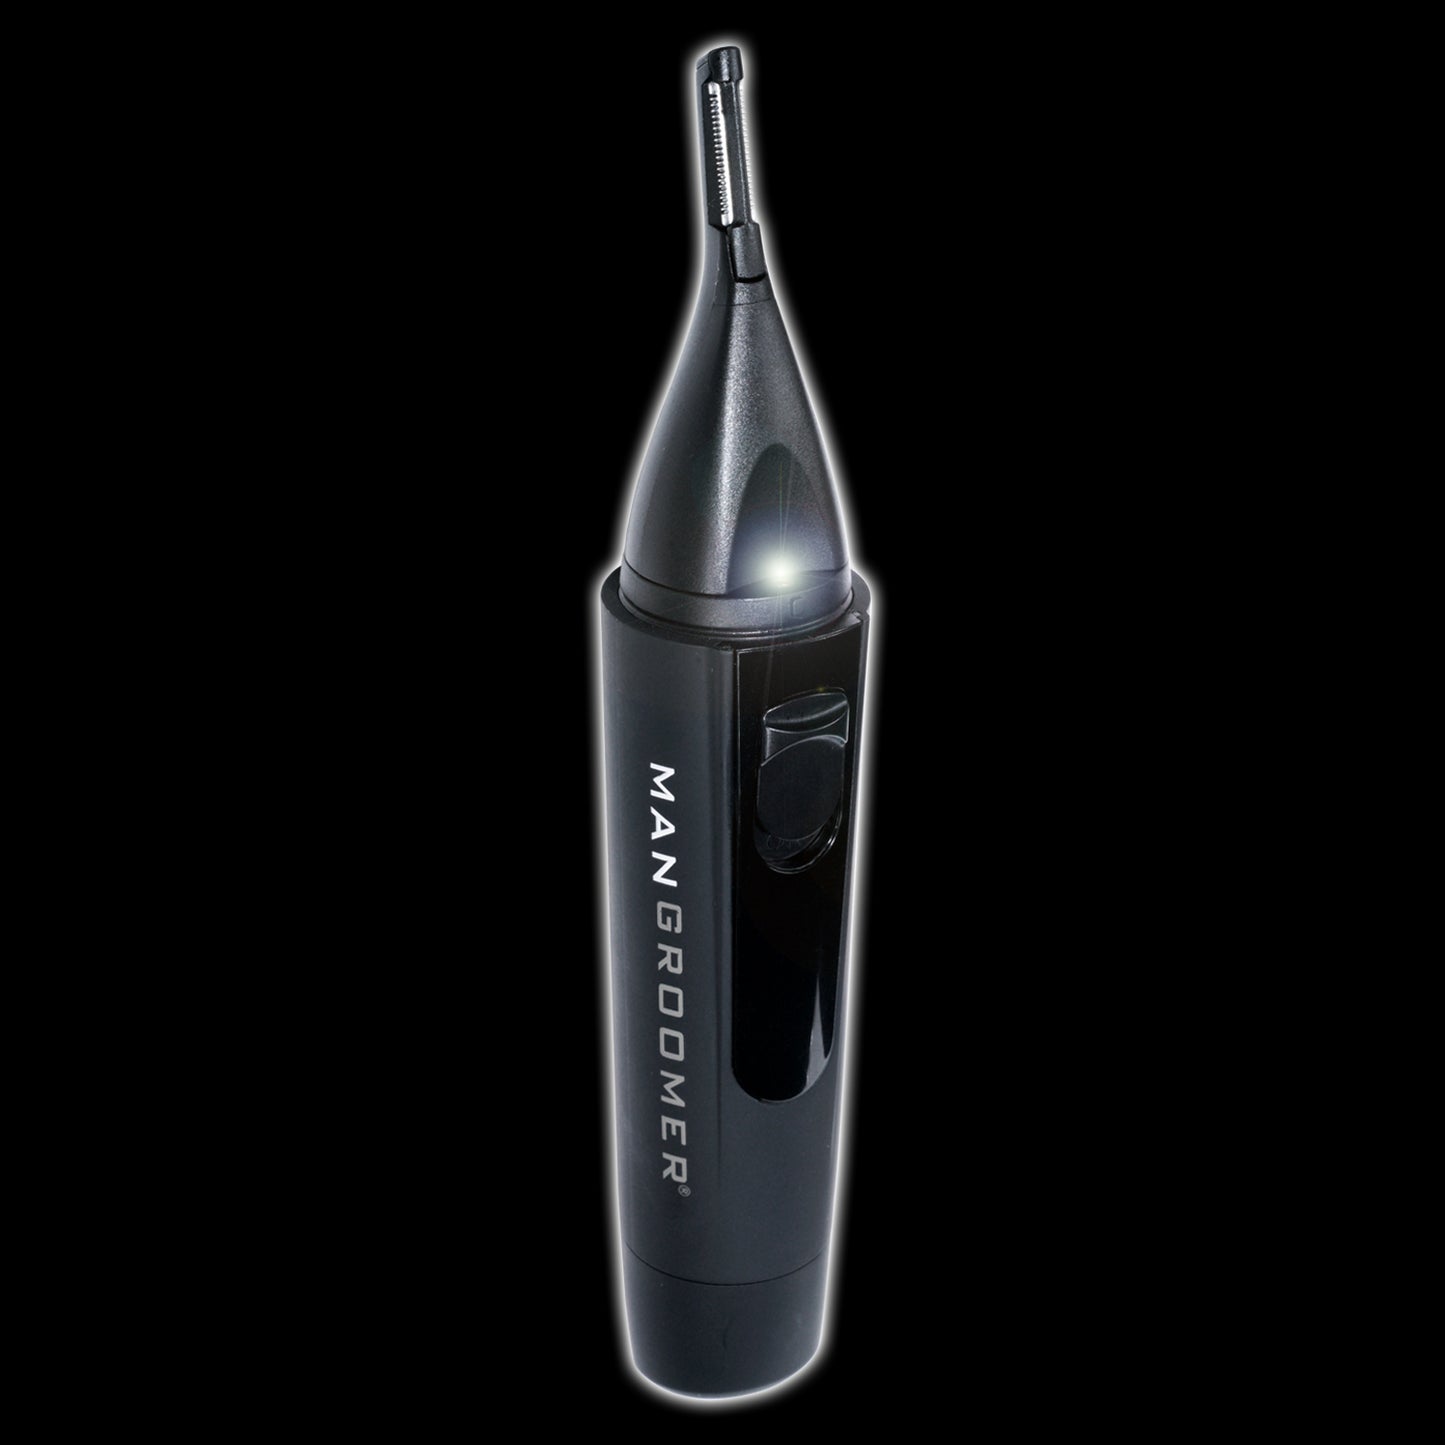 PROFESSIONAL PLUS+ Nose, Ear and Eyebrow Trimmer - Main Image